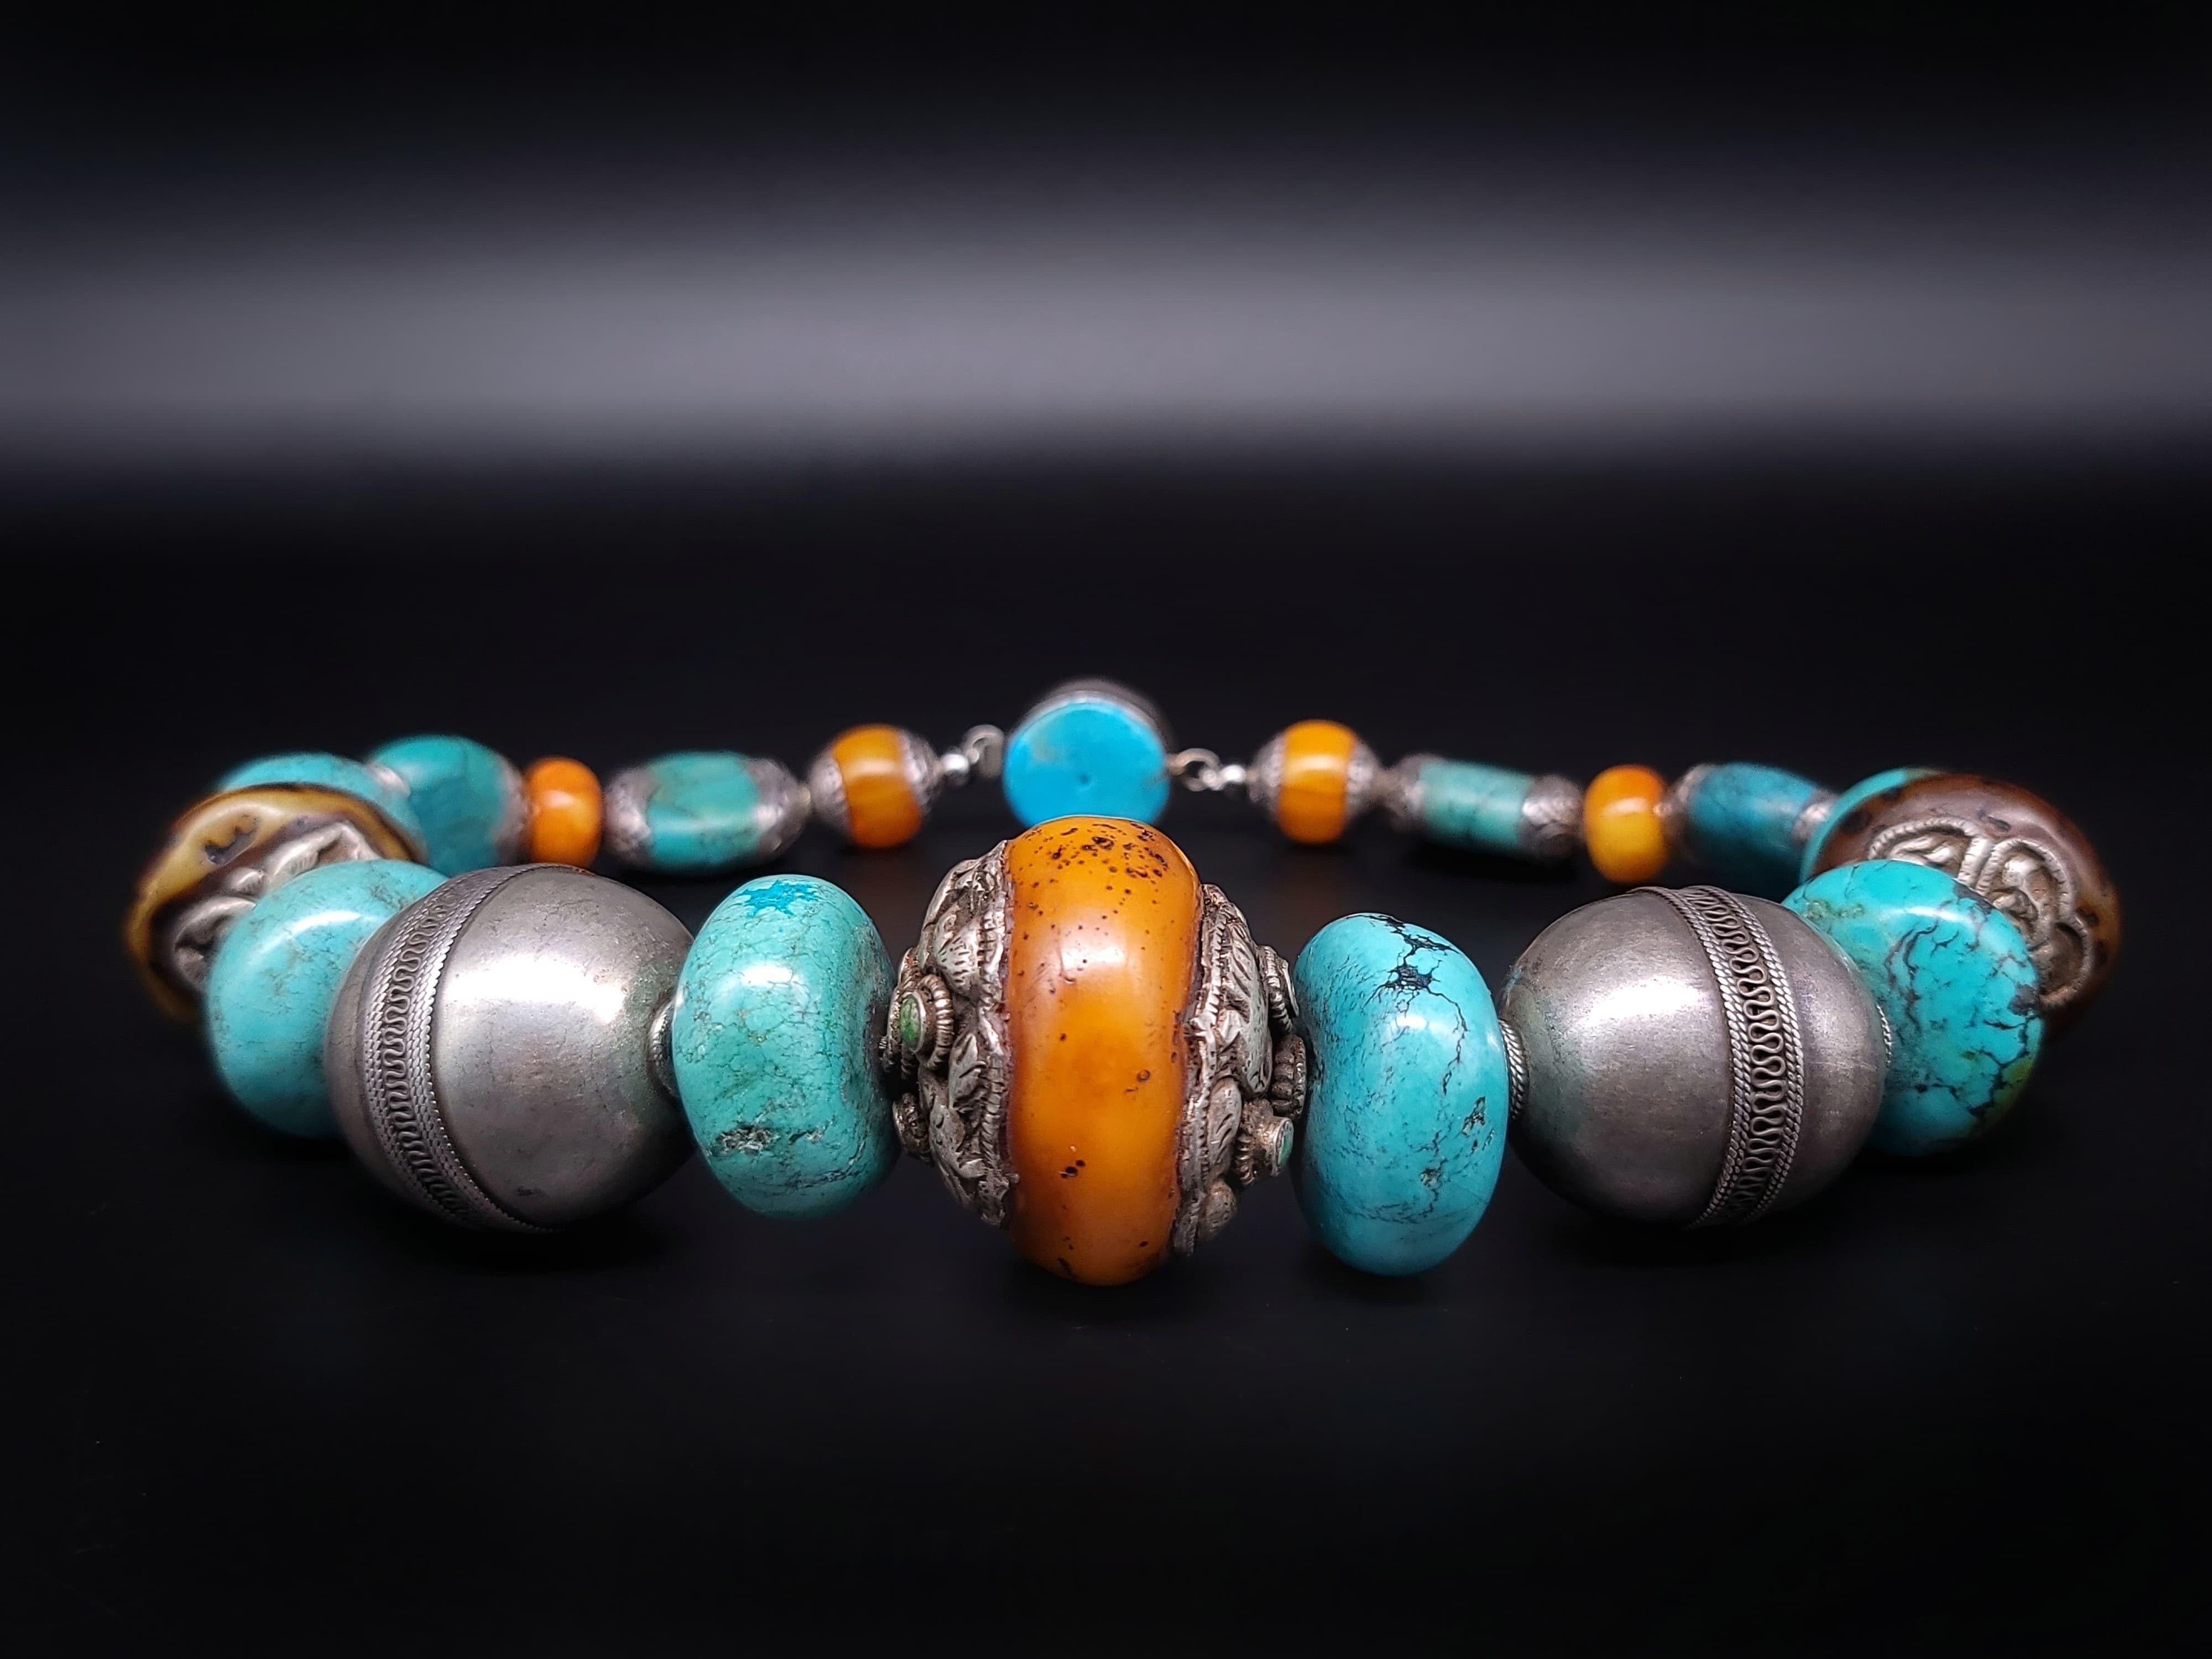 Contemporary A.Jeschel Tibetan Turquoise bold Amber beads necklace. For Sale